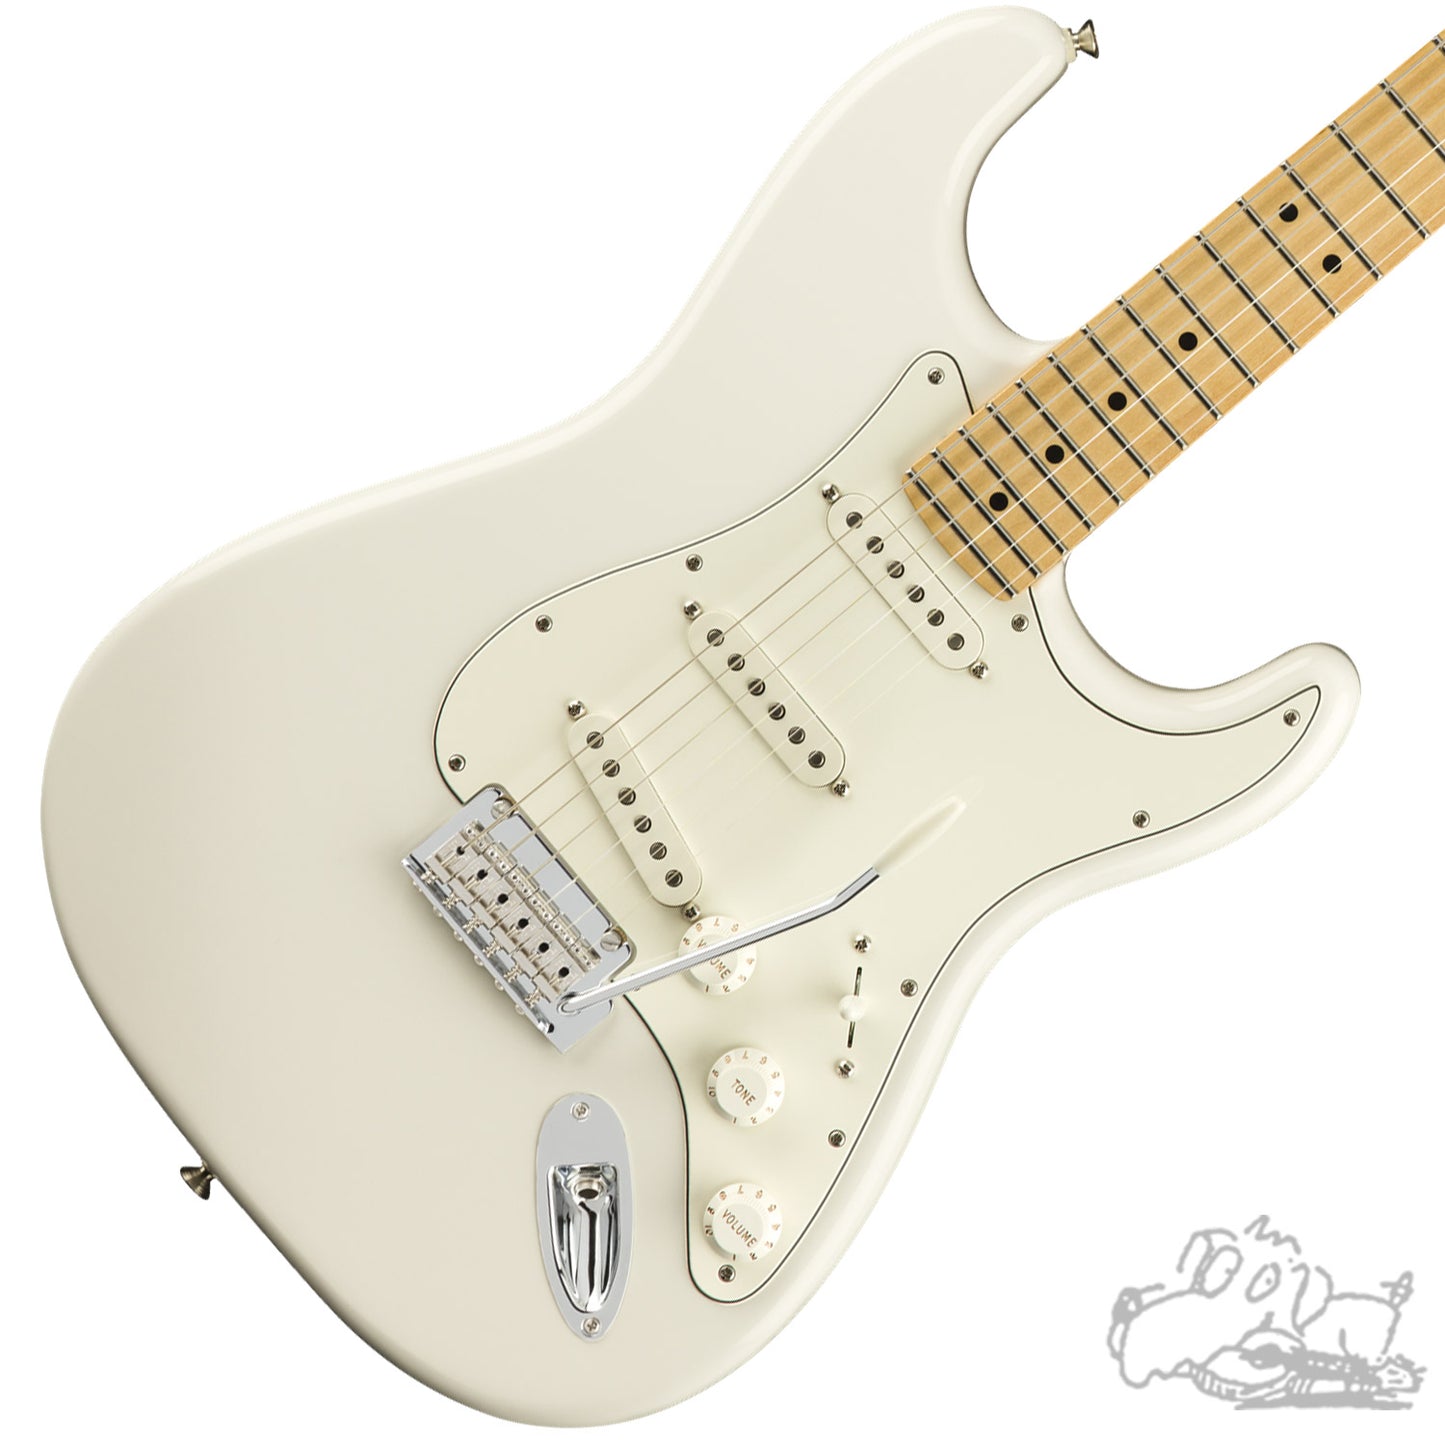 Fender Player Stratocaster - Assorted Colors